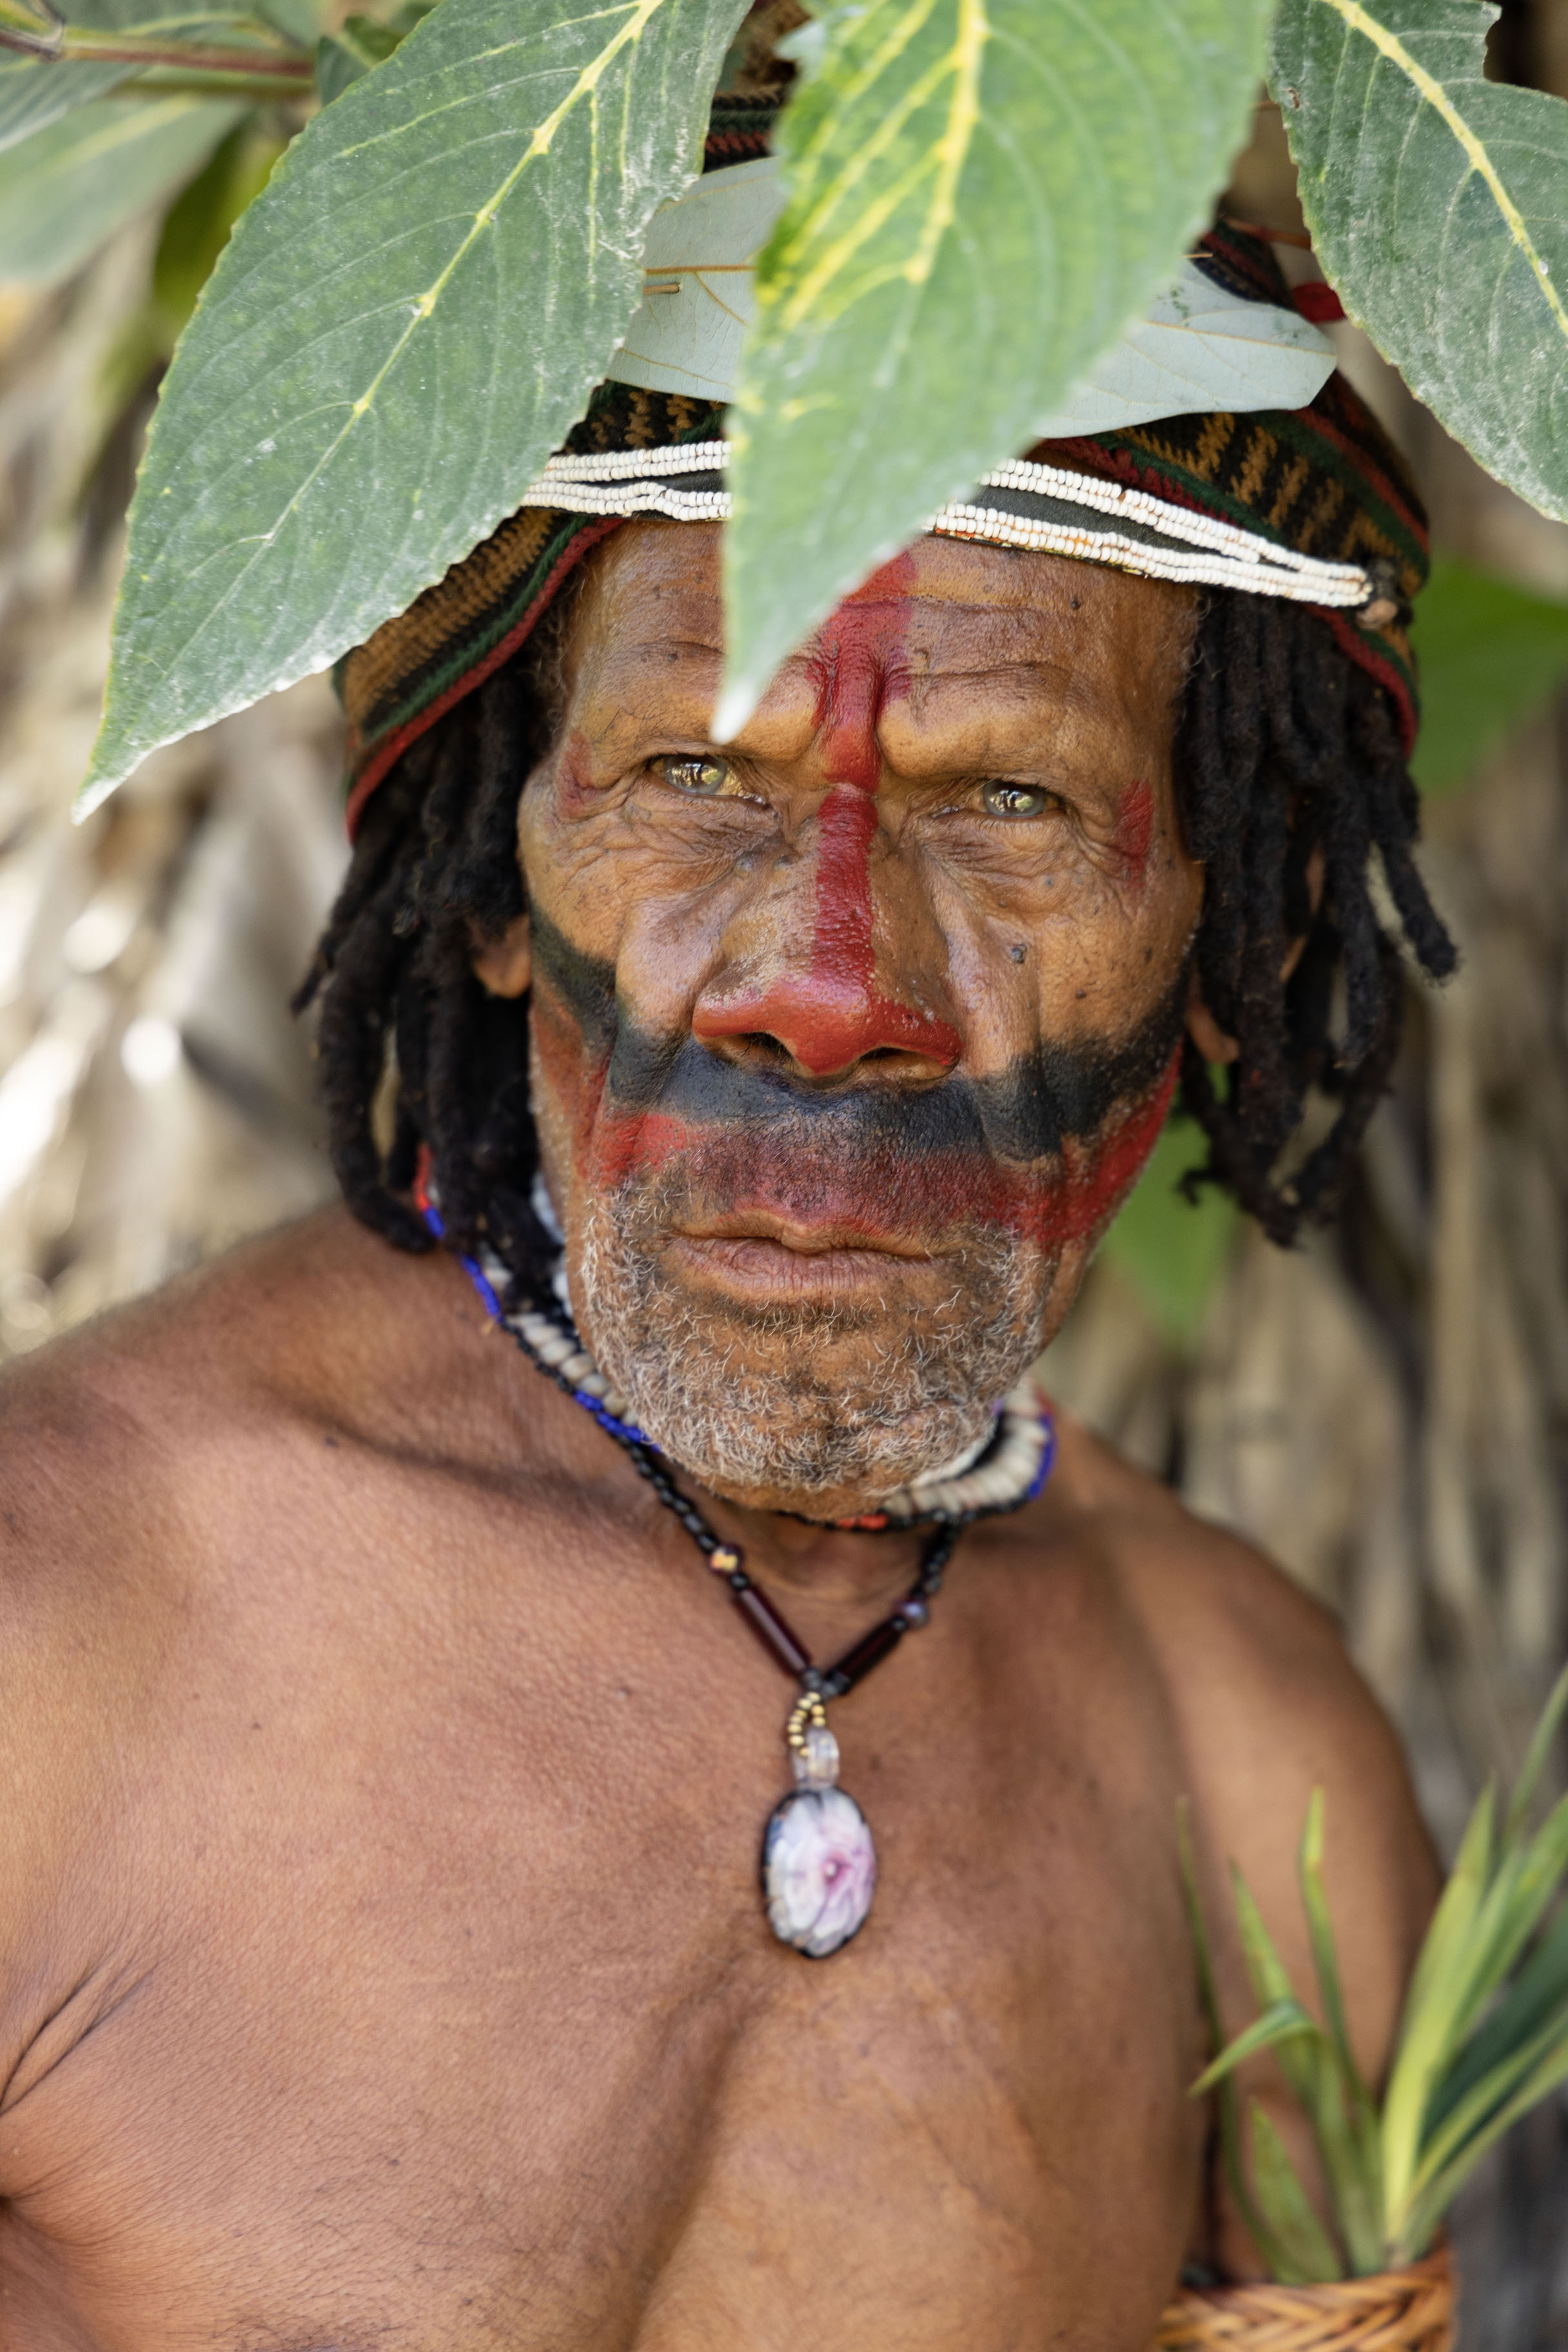 One of the Huli Wigmen with a differently painted face | Huli Wigmen | Papua Nuova Guinea